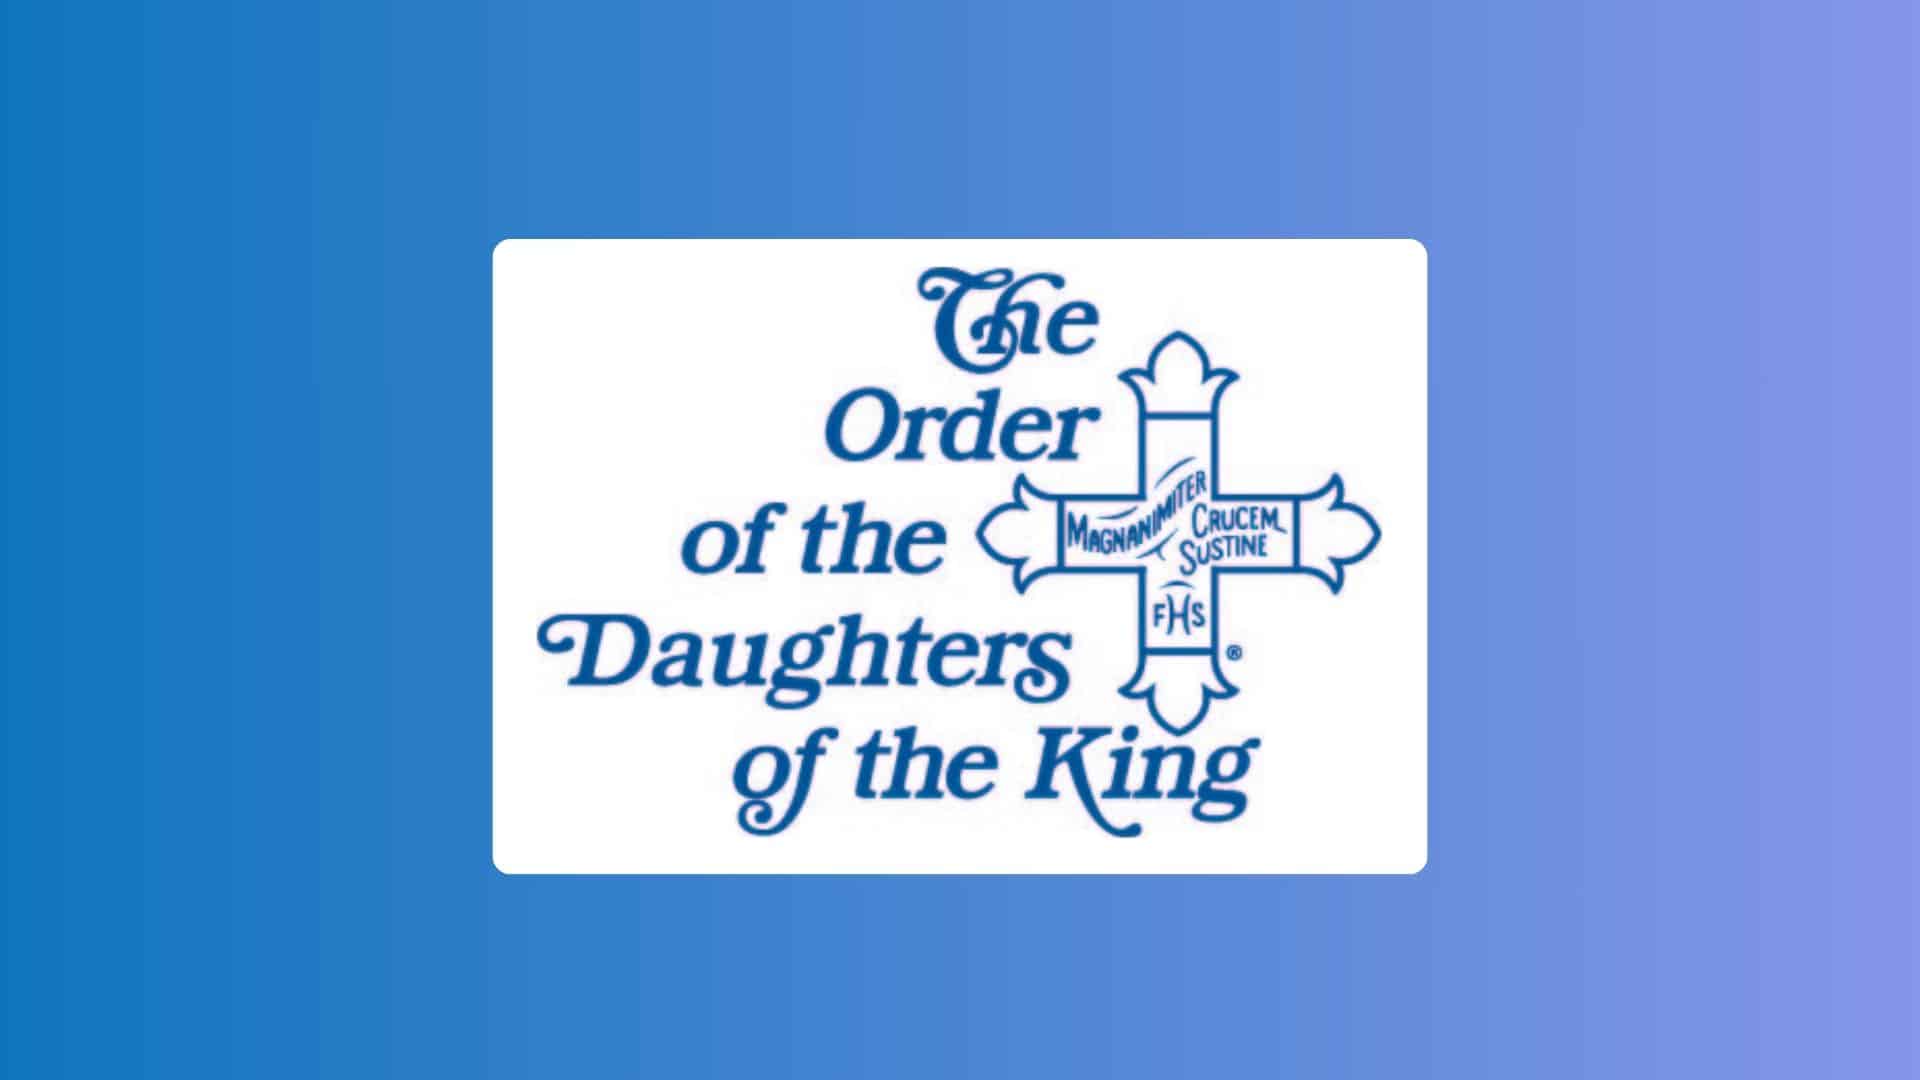 The Order of the Daughters of the King logo